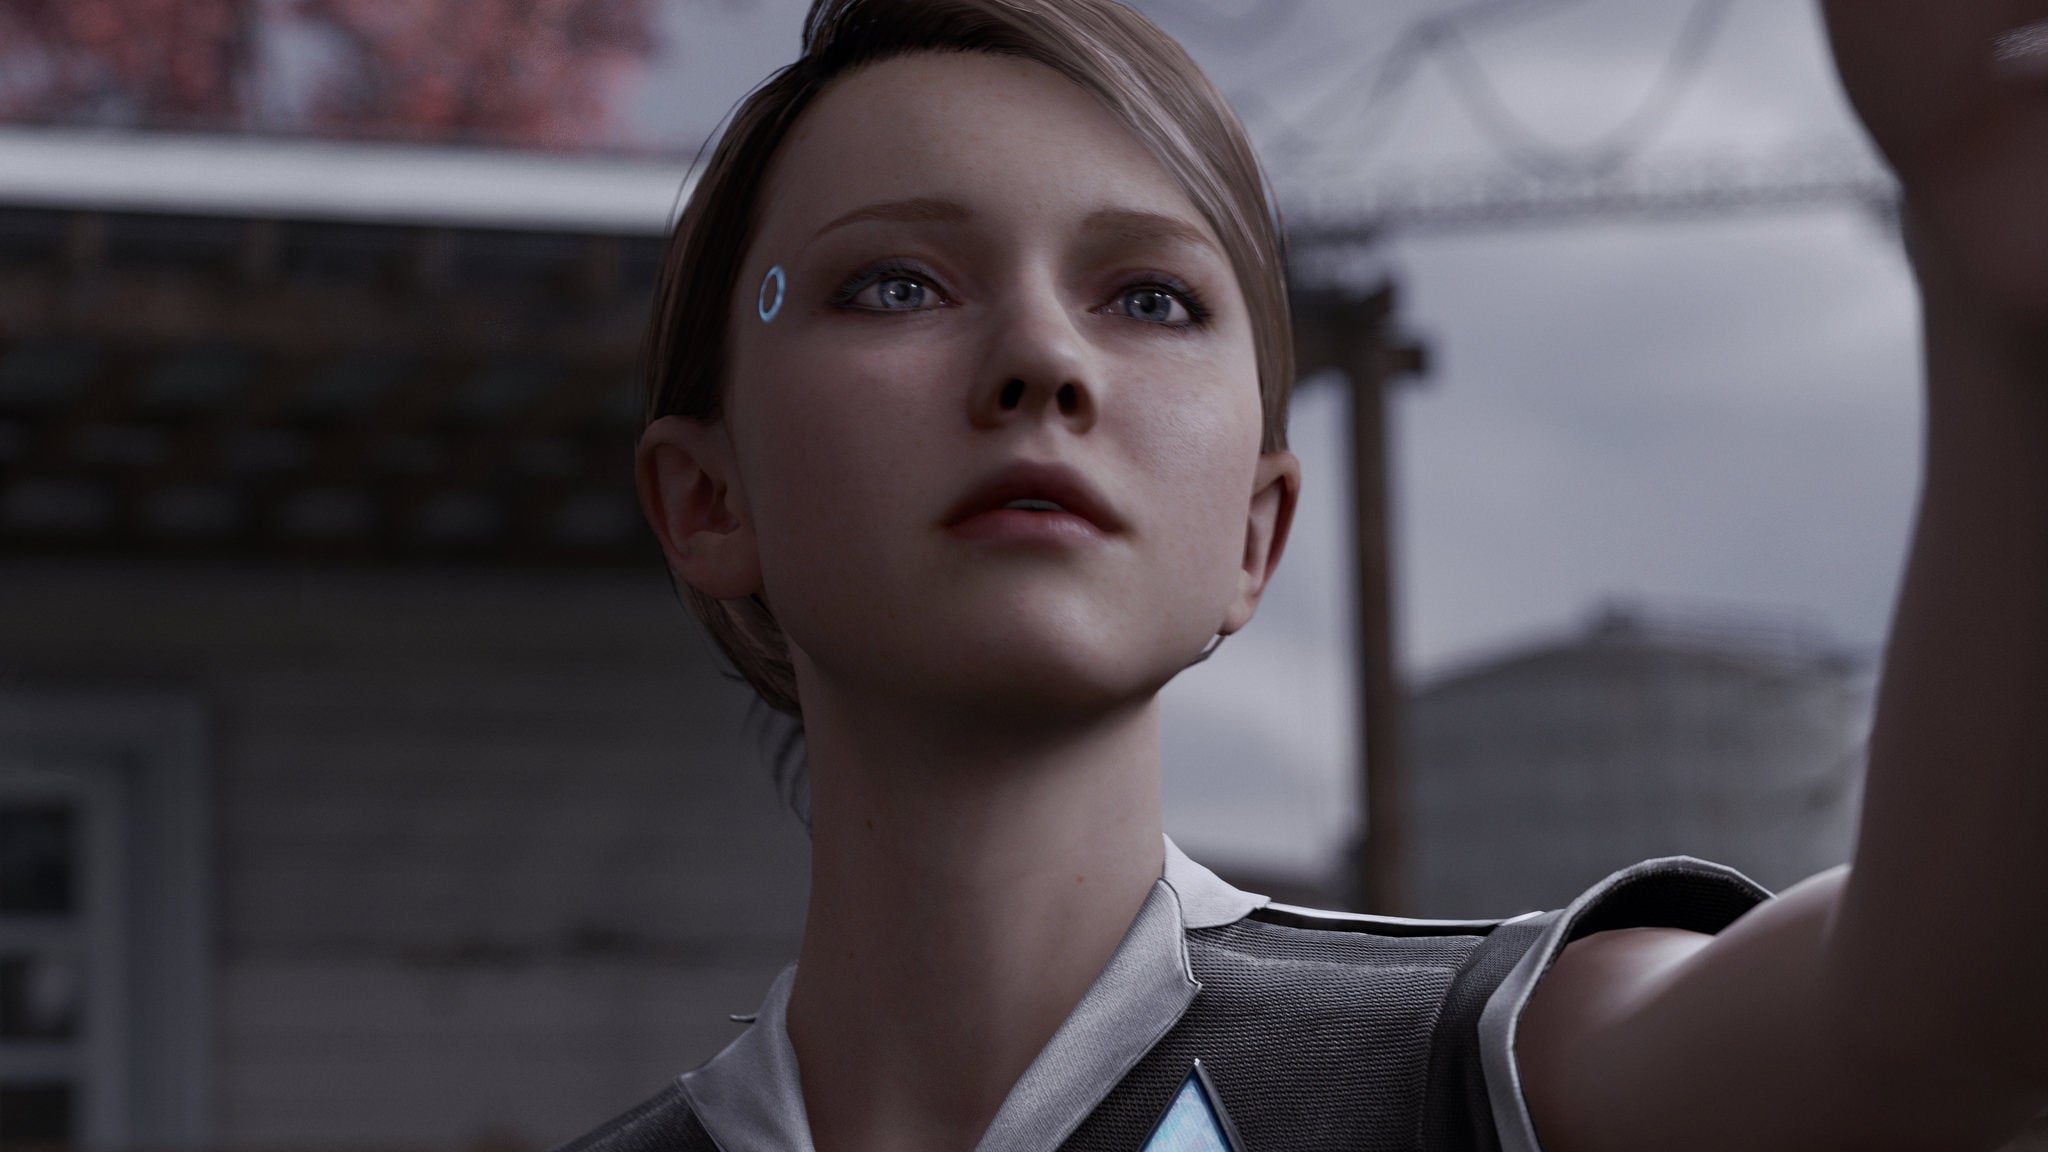 Image for Detroit: Become Human player base tops 1.5 million worldwide